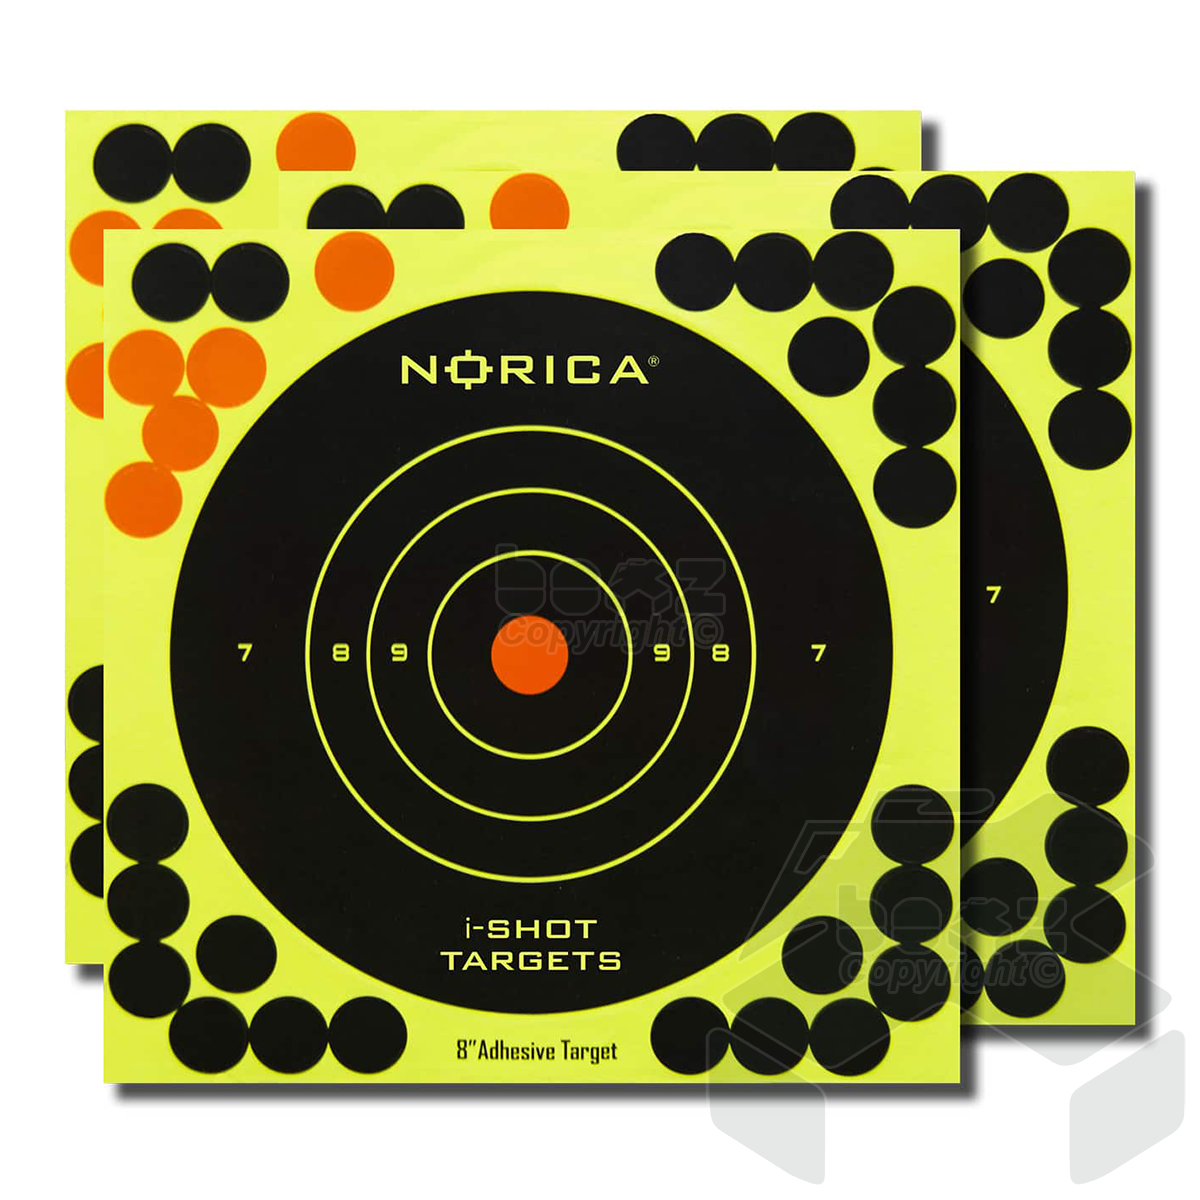 Norica i-Shot Reactive Targets (Adhesive Targets) 8" - Pack of 25